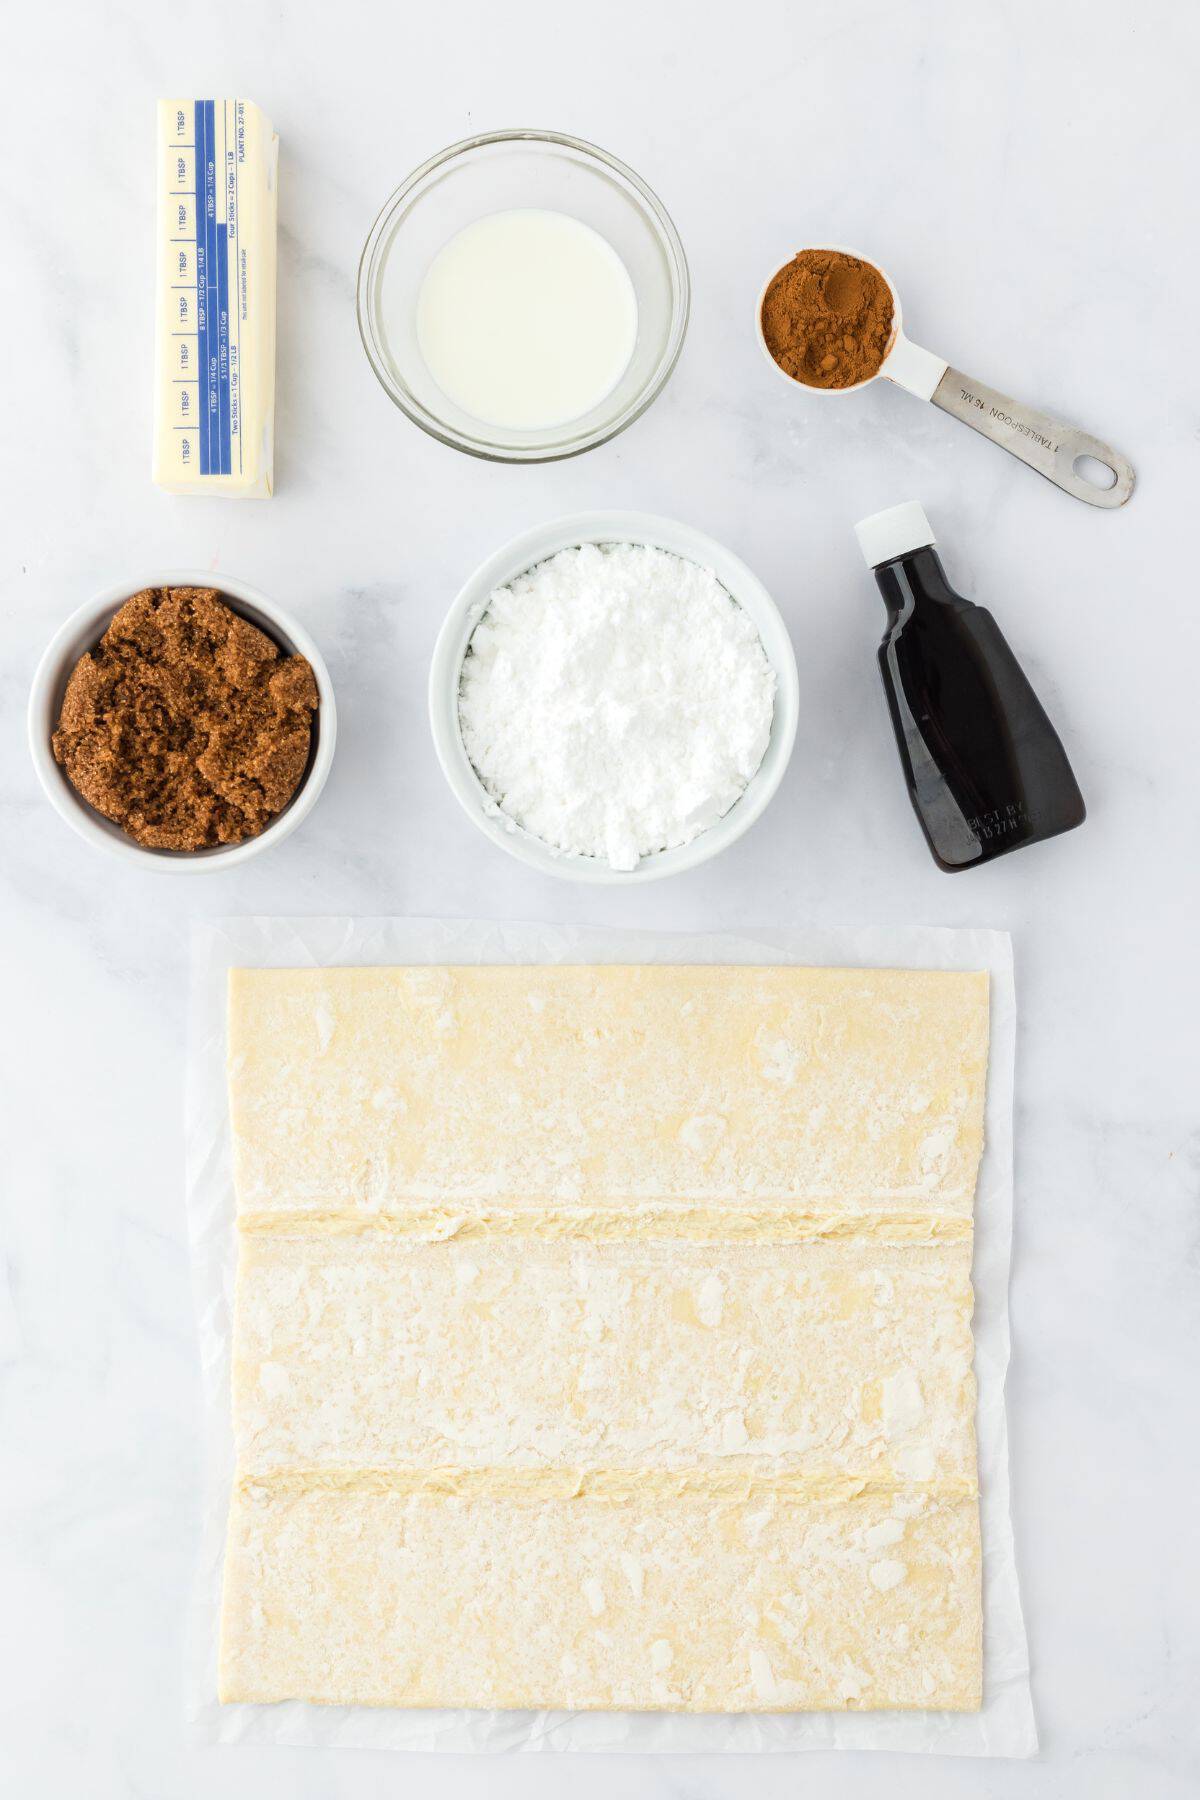 Ingredients such as brown sugar, butter, spices and puff pastry for easy cinnamon rolls.